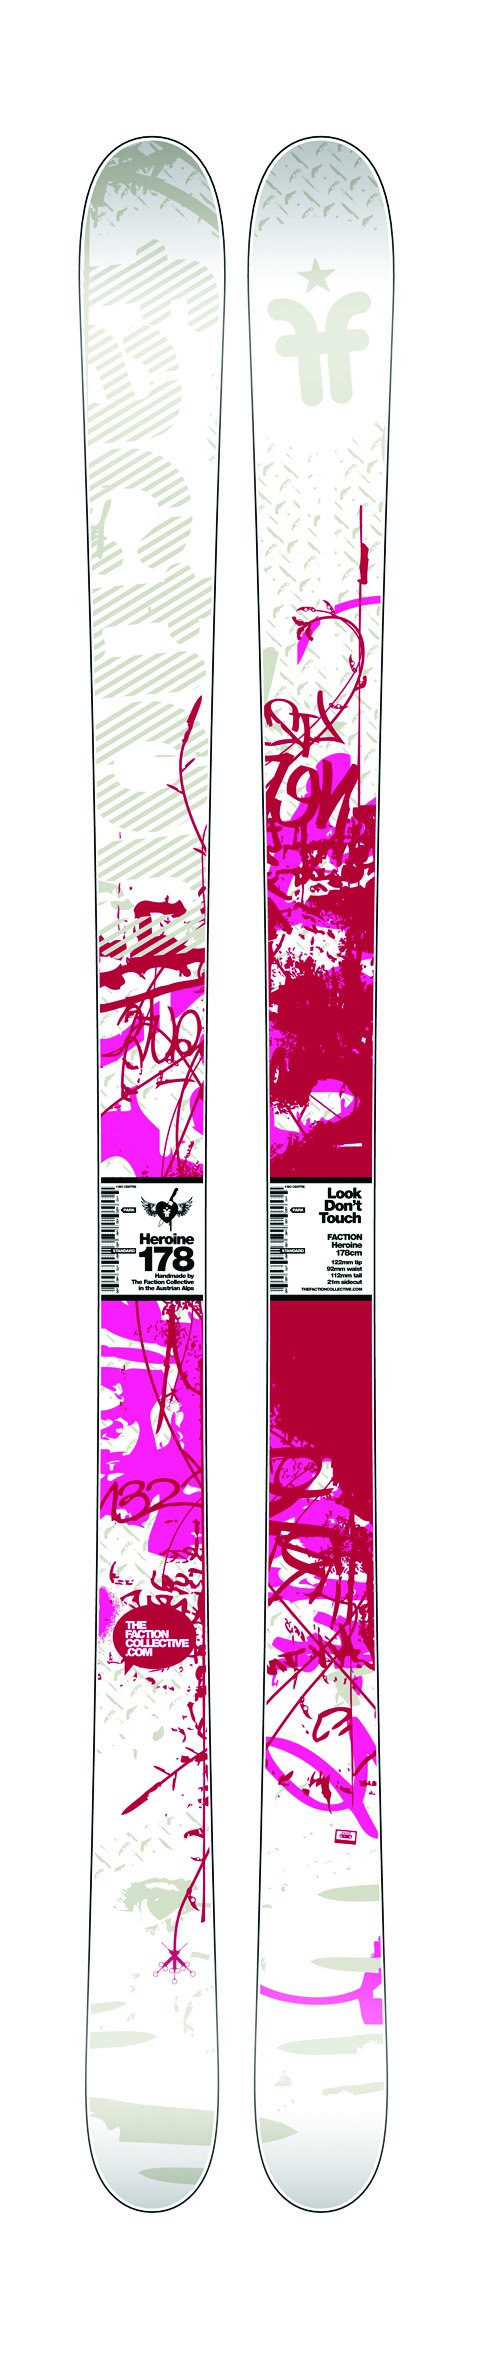 The Faction line of skis for 08/09 - 3 of 5